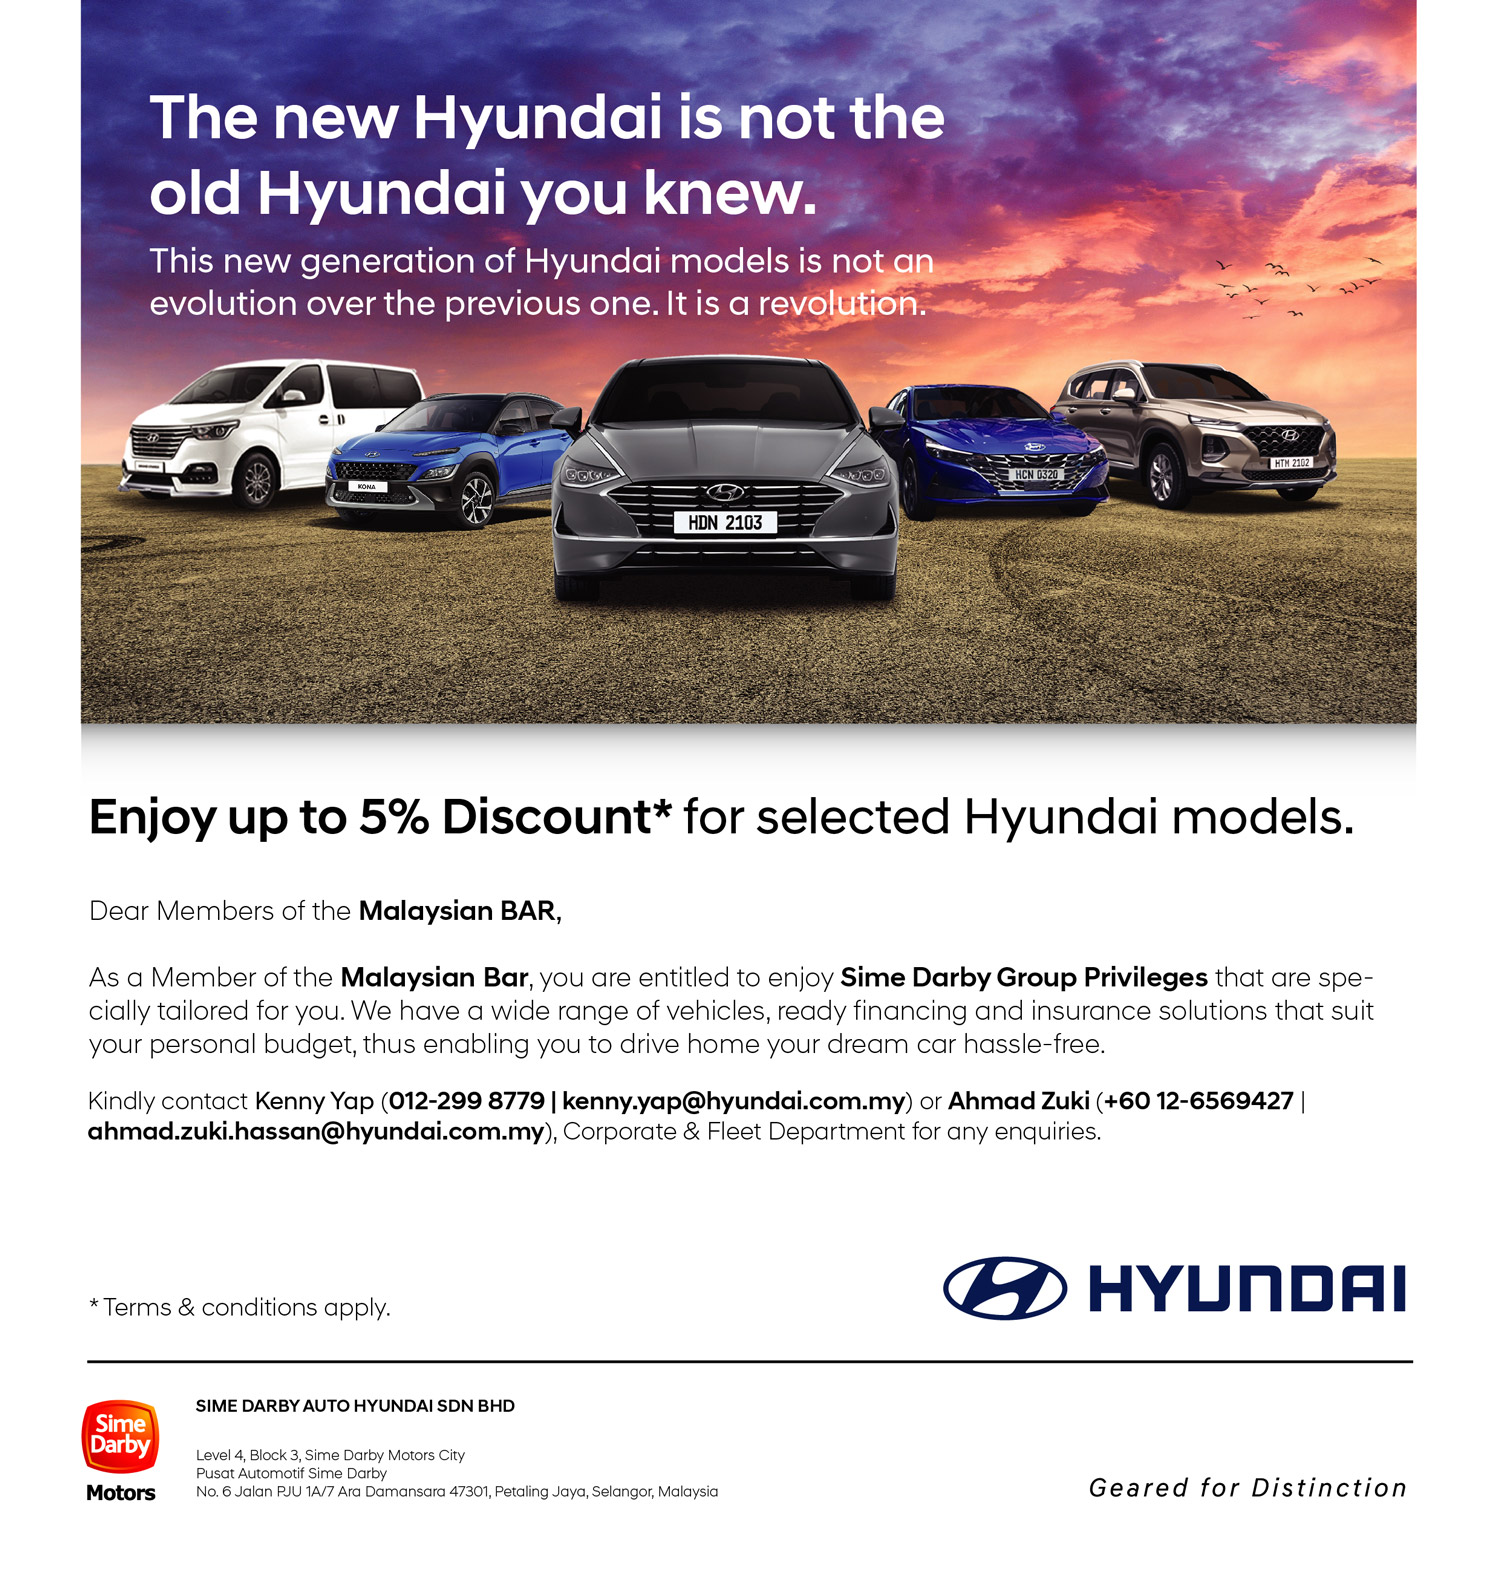 The new Hyundai is not the old Hyundai you knew | This new generation of Hyundai models is not an evolution over the previous one. It is a revolution. Enjoy up to 5% Discount* for selected Hyundai models. | Terms & conditiona apply.